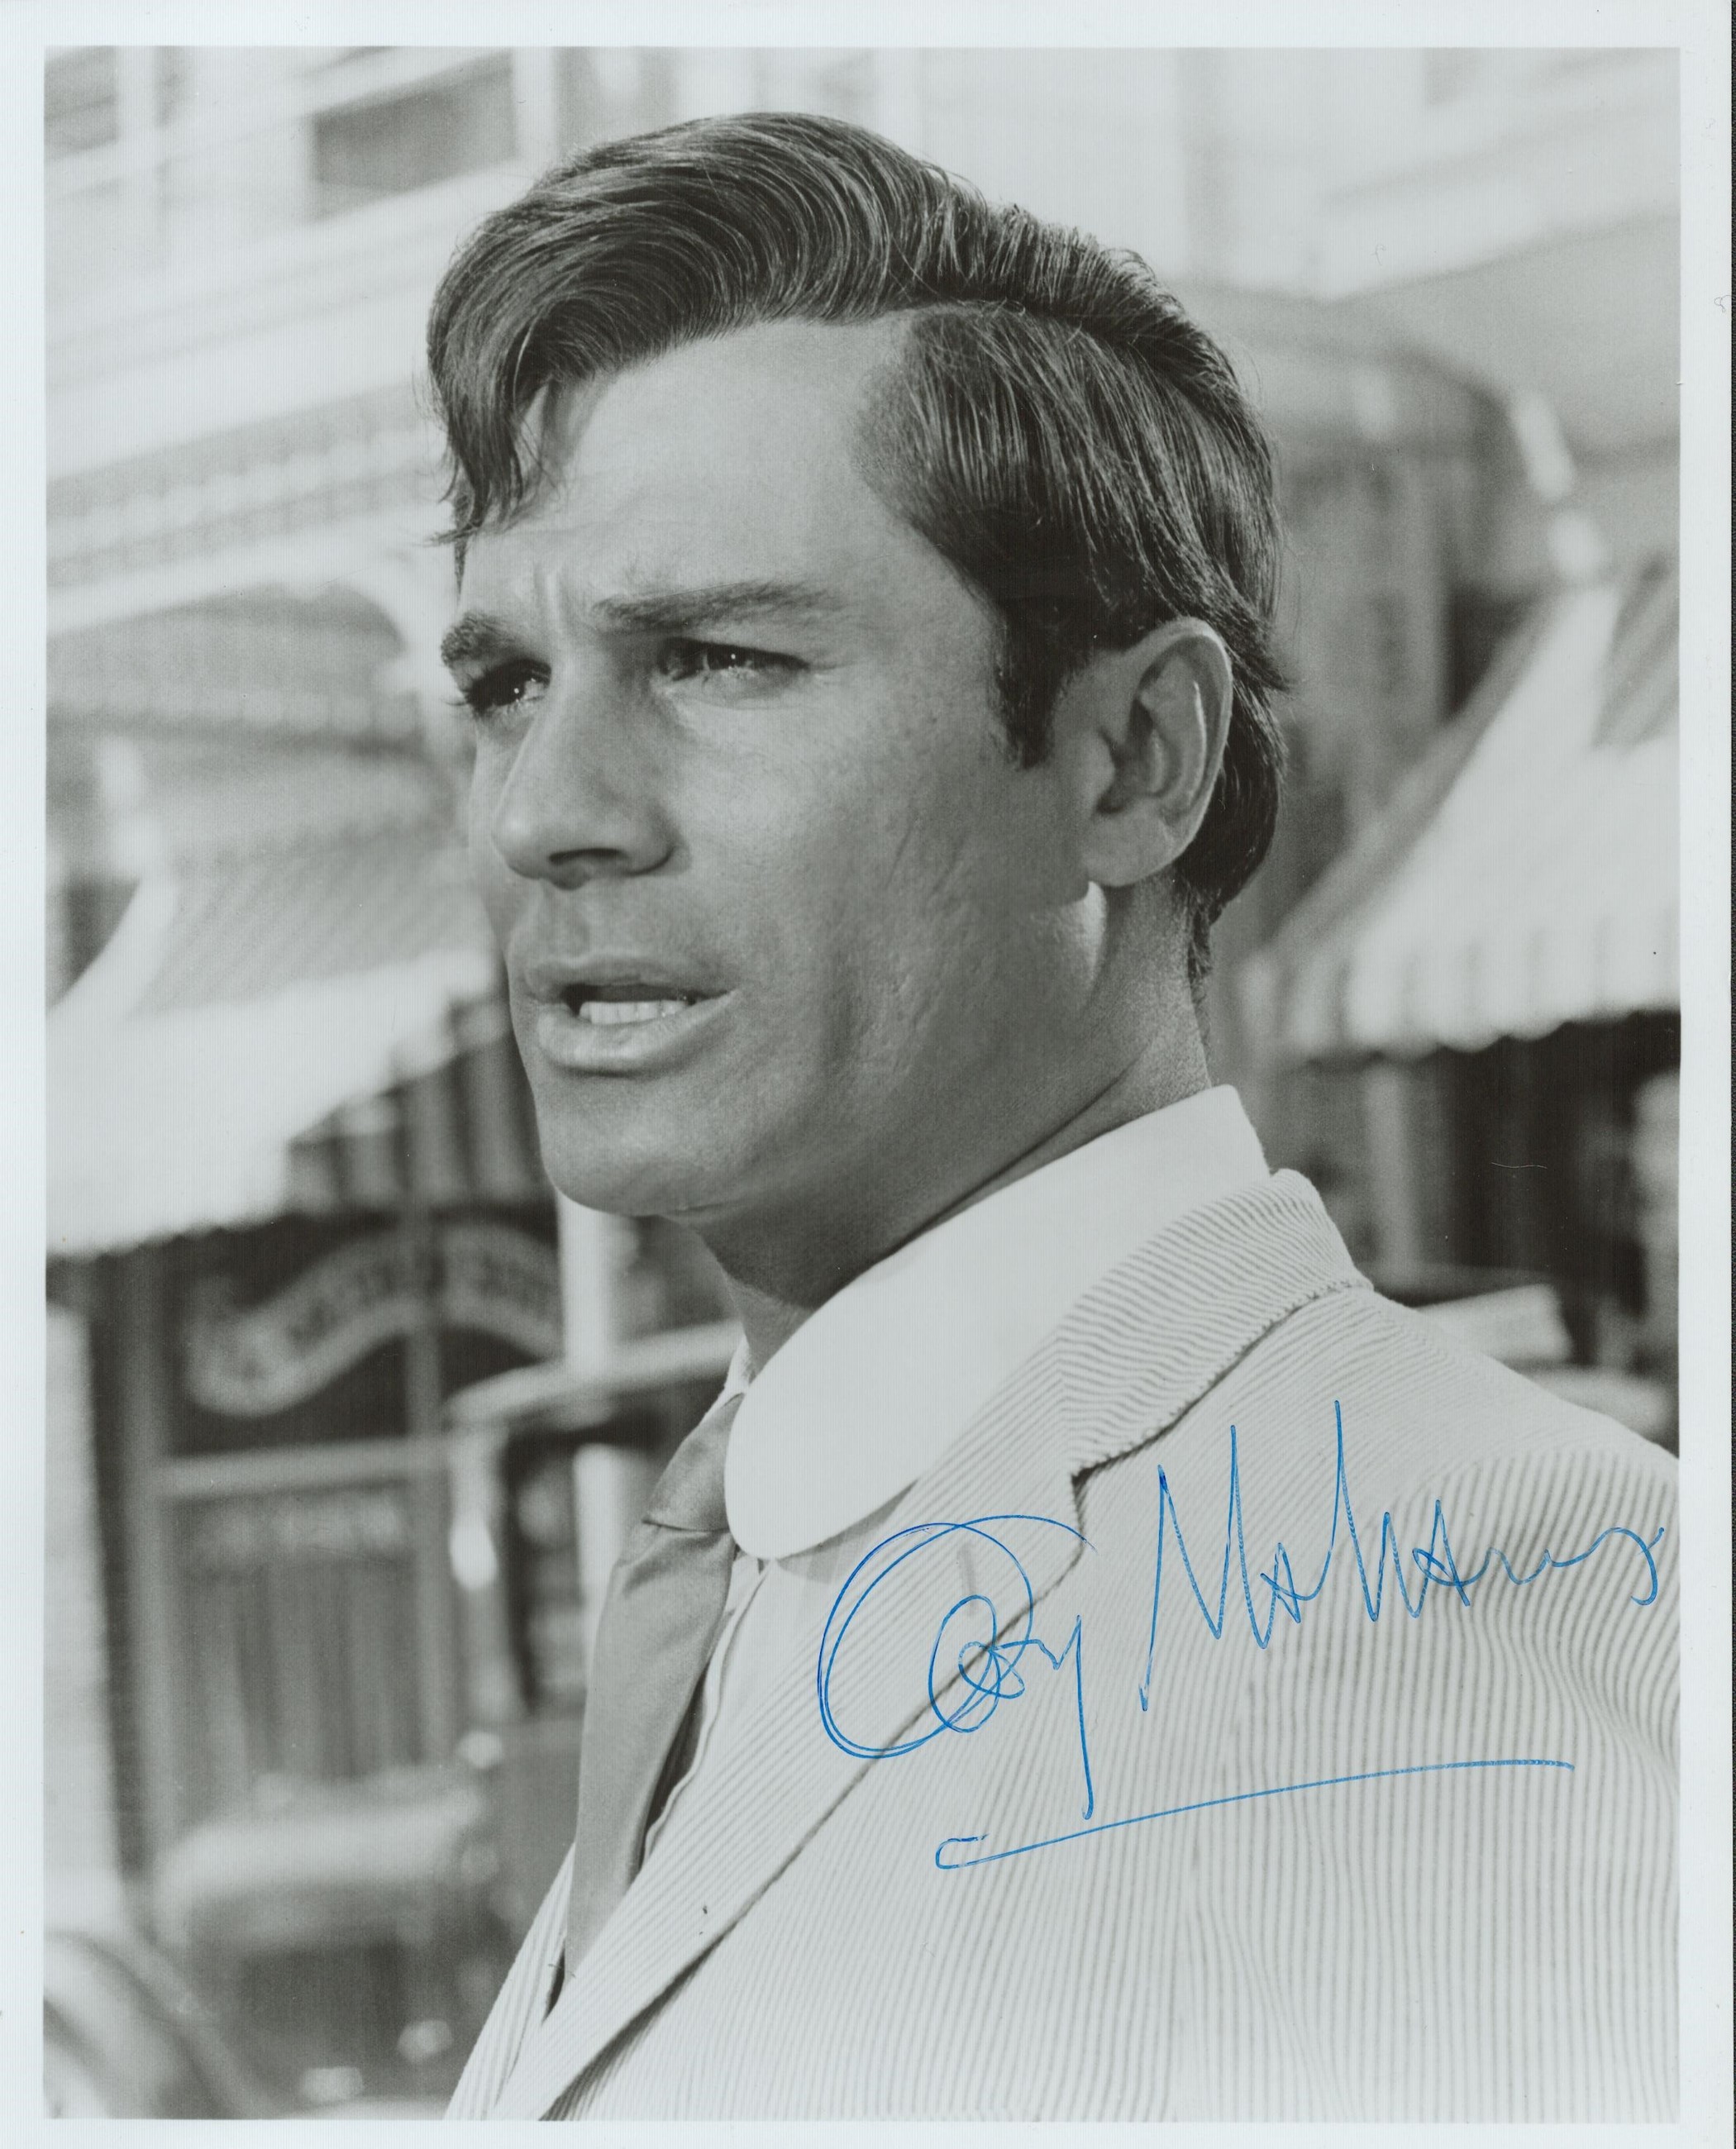 American Actor George Maharis Signed 10 x 8 inch Black and White Photo. Signed in blue ink. Good